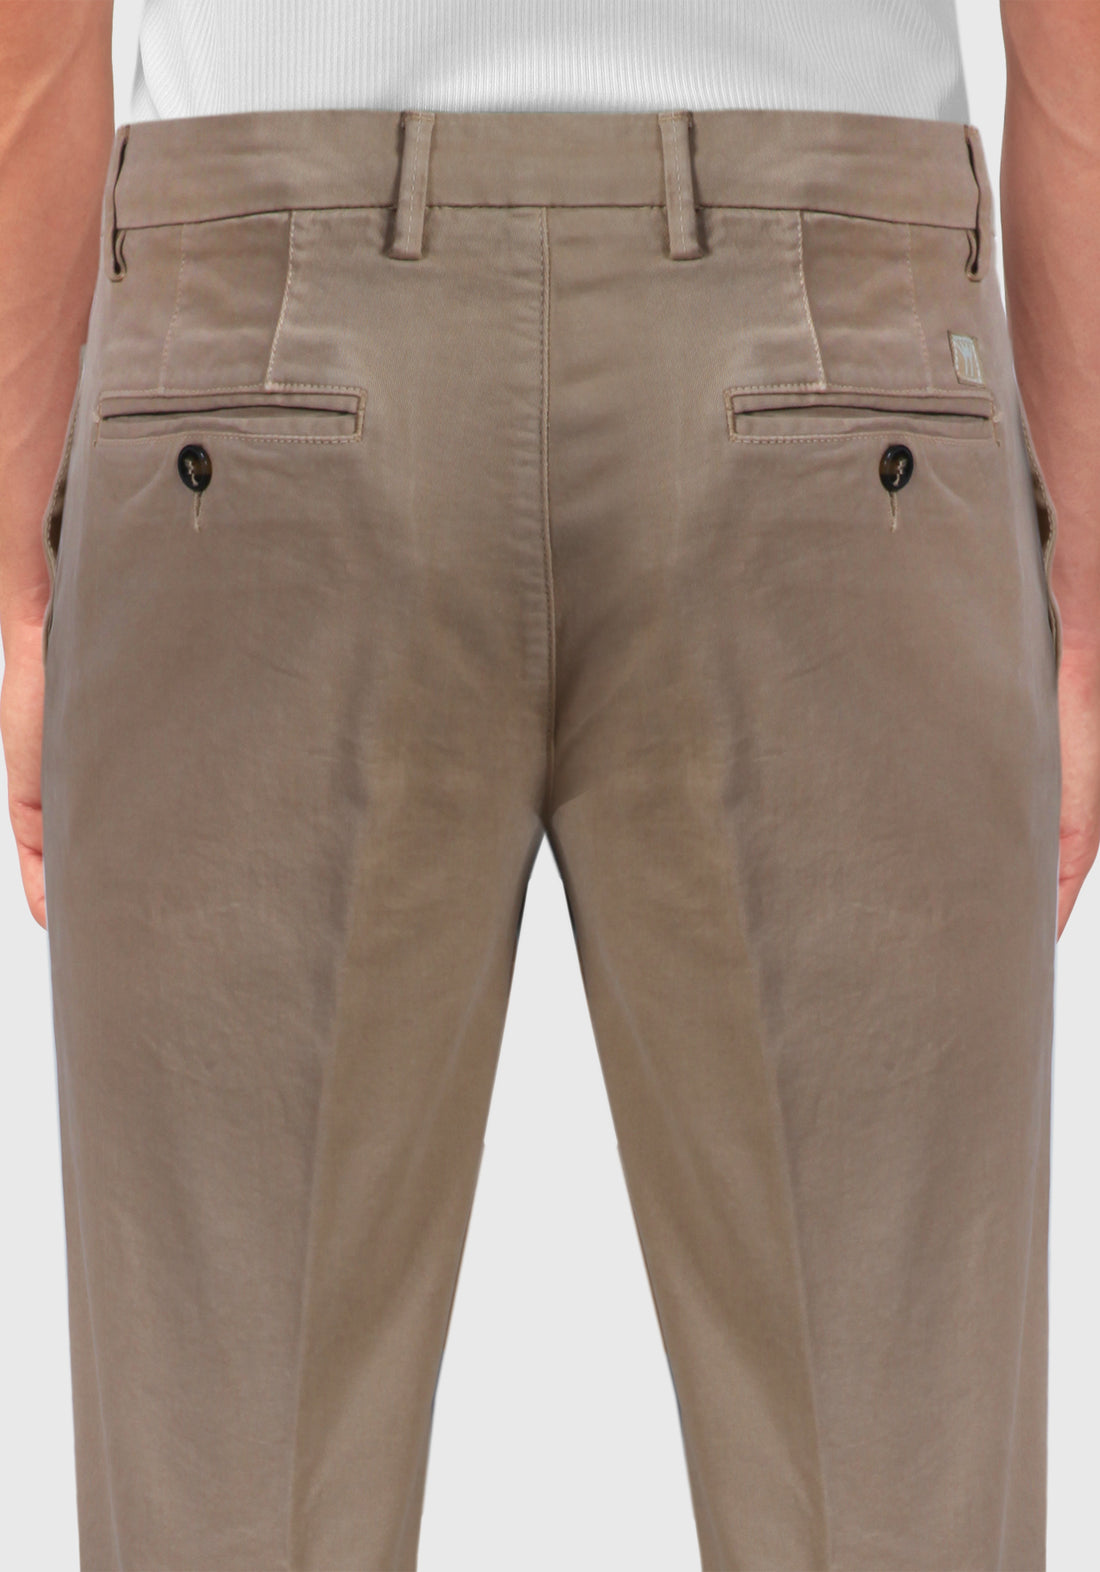 America Pocket Chinos Trousers Warm cotton - Beige